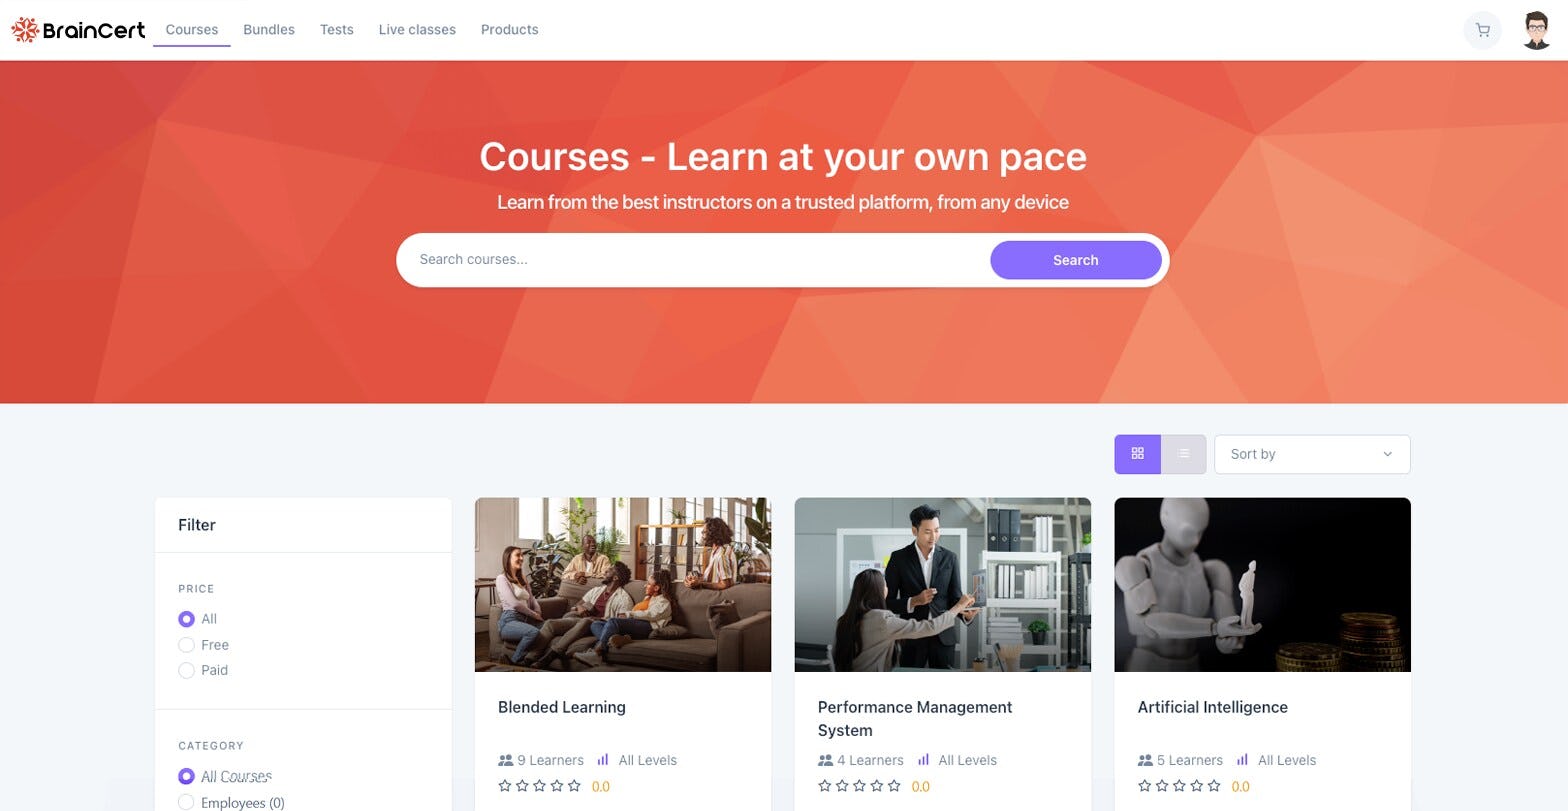 BrainCert Software - Redesigned Catalog Pages ­has a fresh new look, making it easier than ever for learners to explore and discover your courses, tests, bundles, products, and live classes.